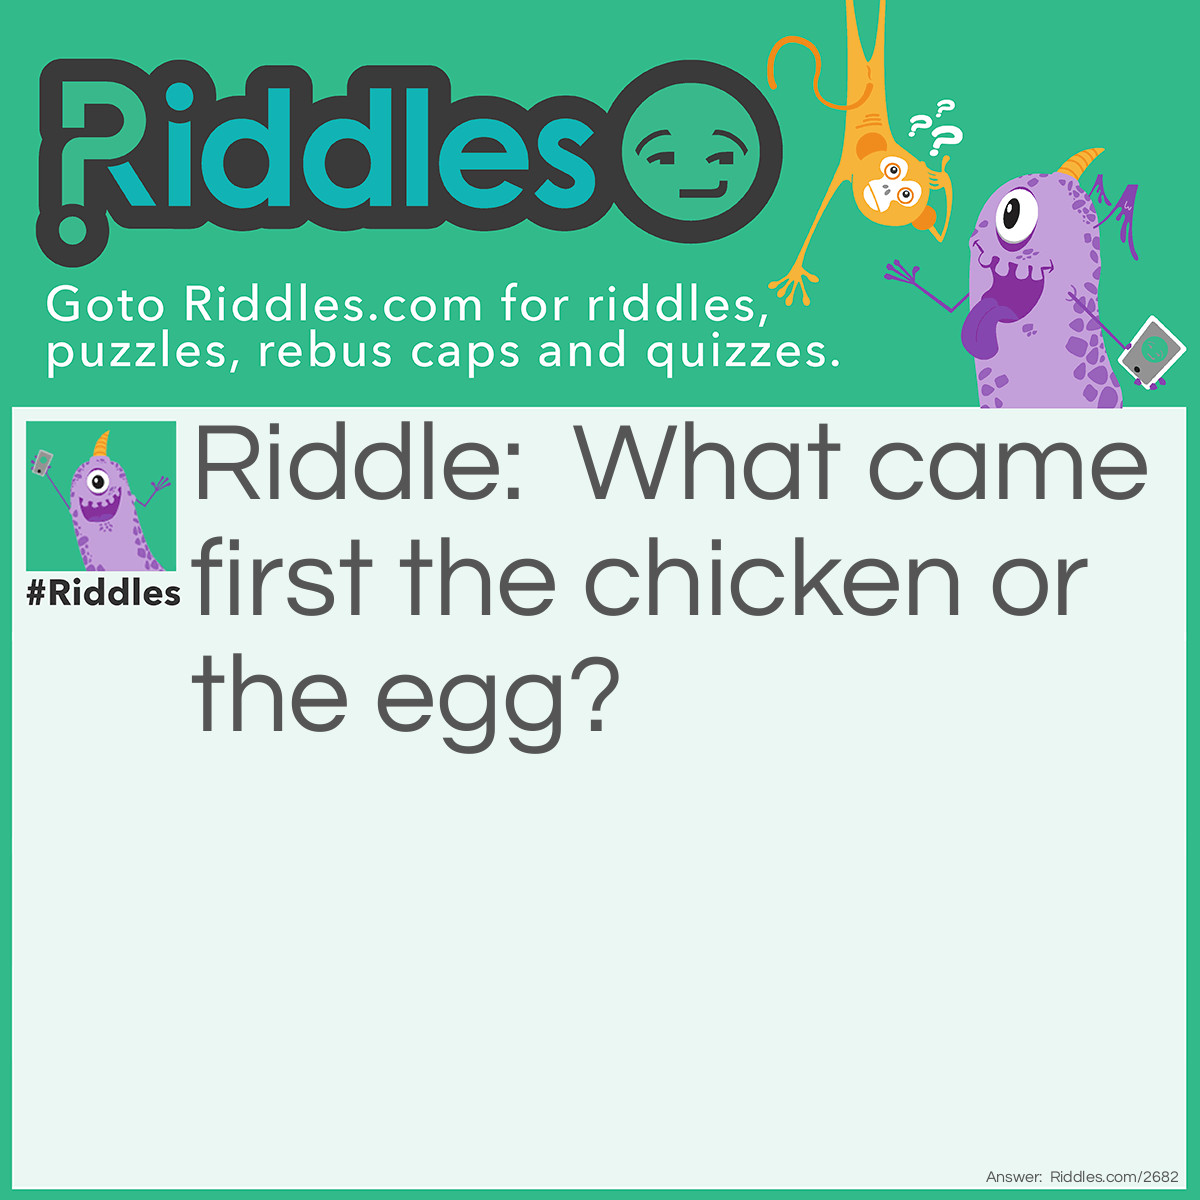 Riddle: What came first the chicken or the egg? Answer: The chicken. There had to be a chicken in order for the egg to be layed.